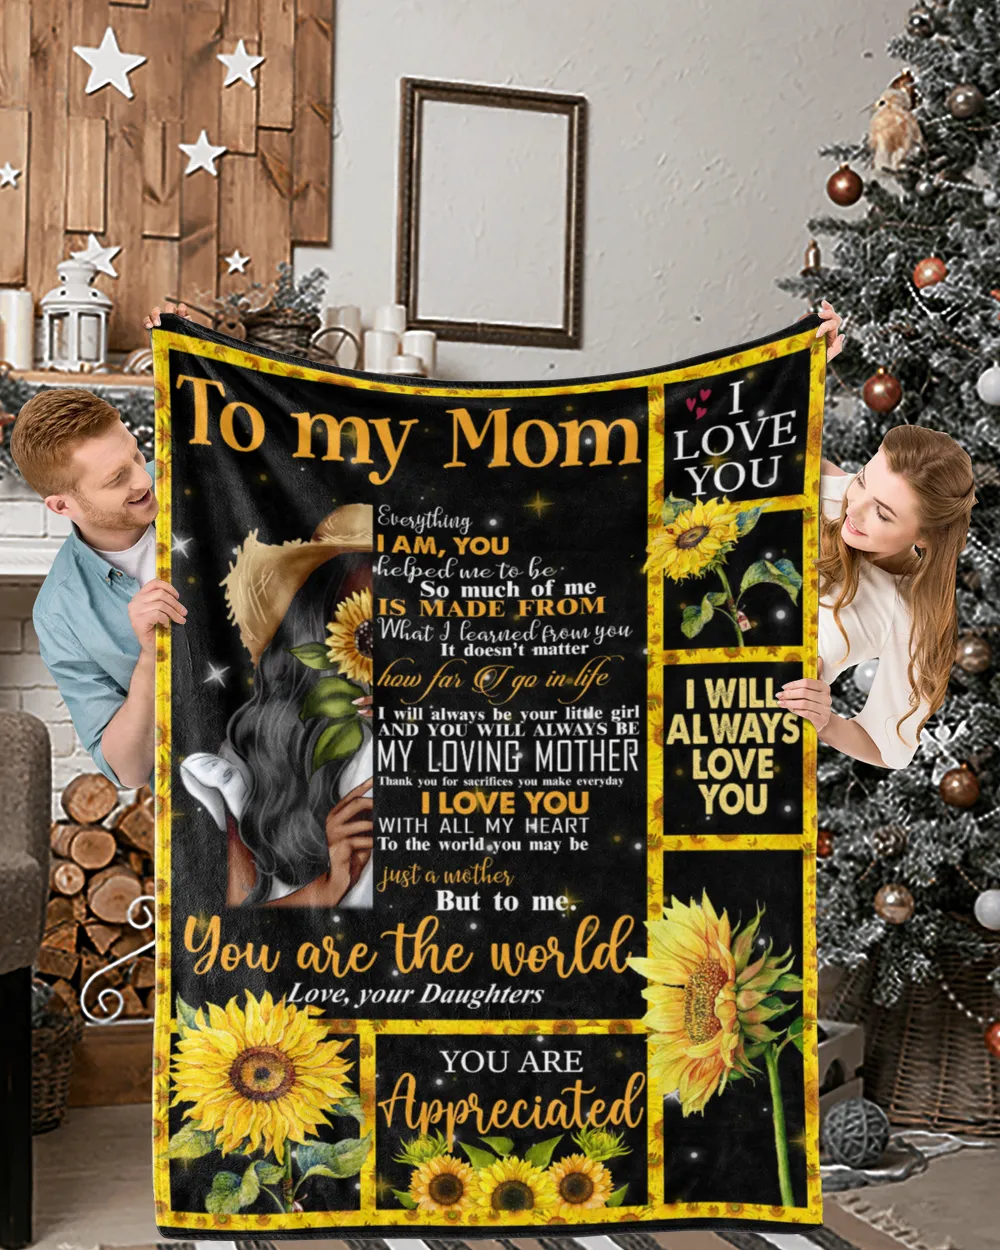 To My Mom Blanket - Mother's Day Gift